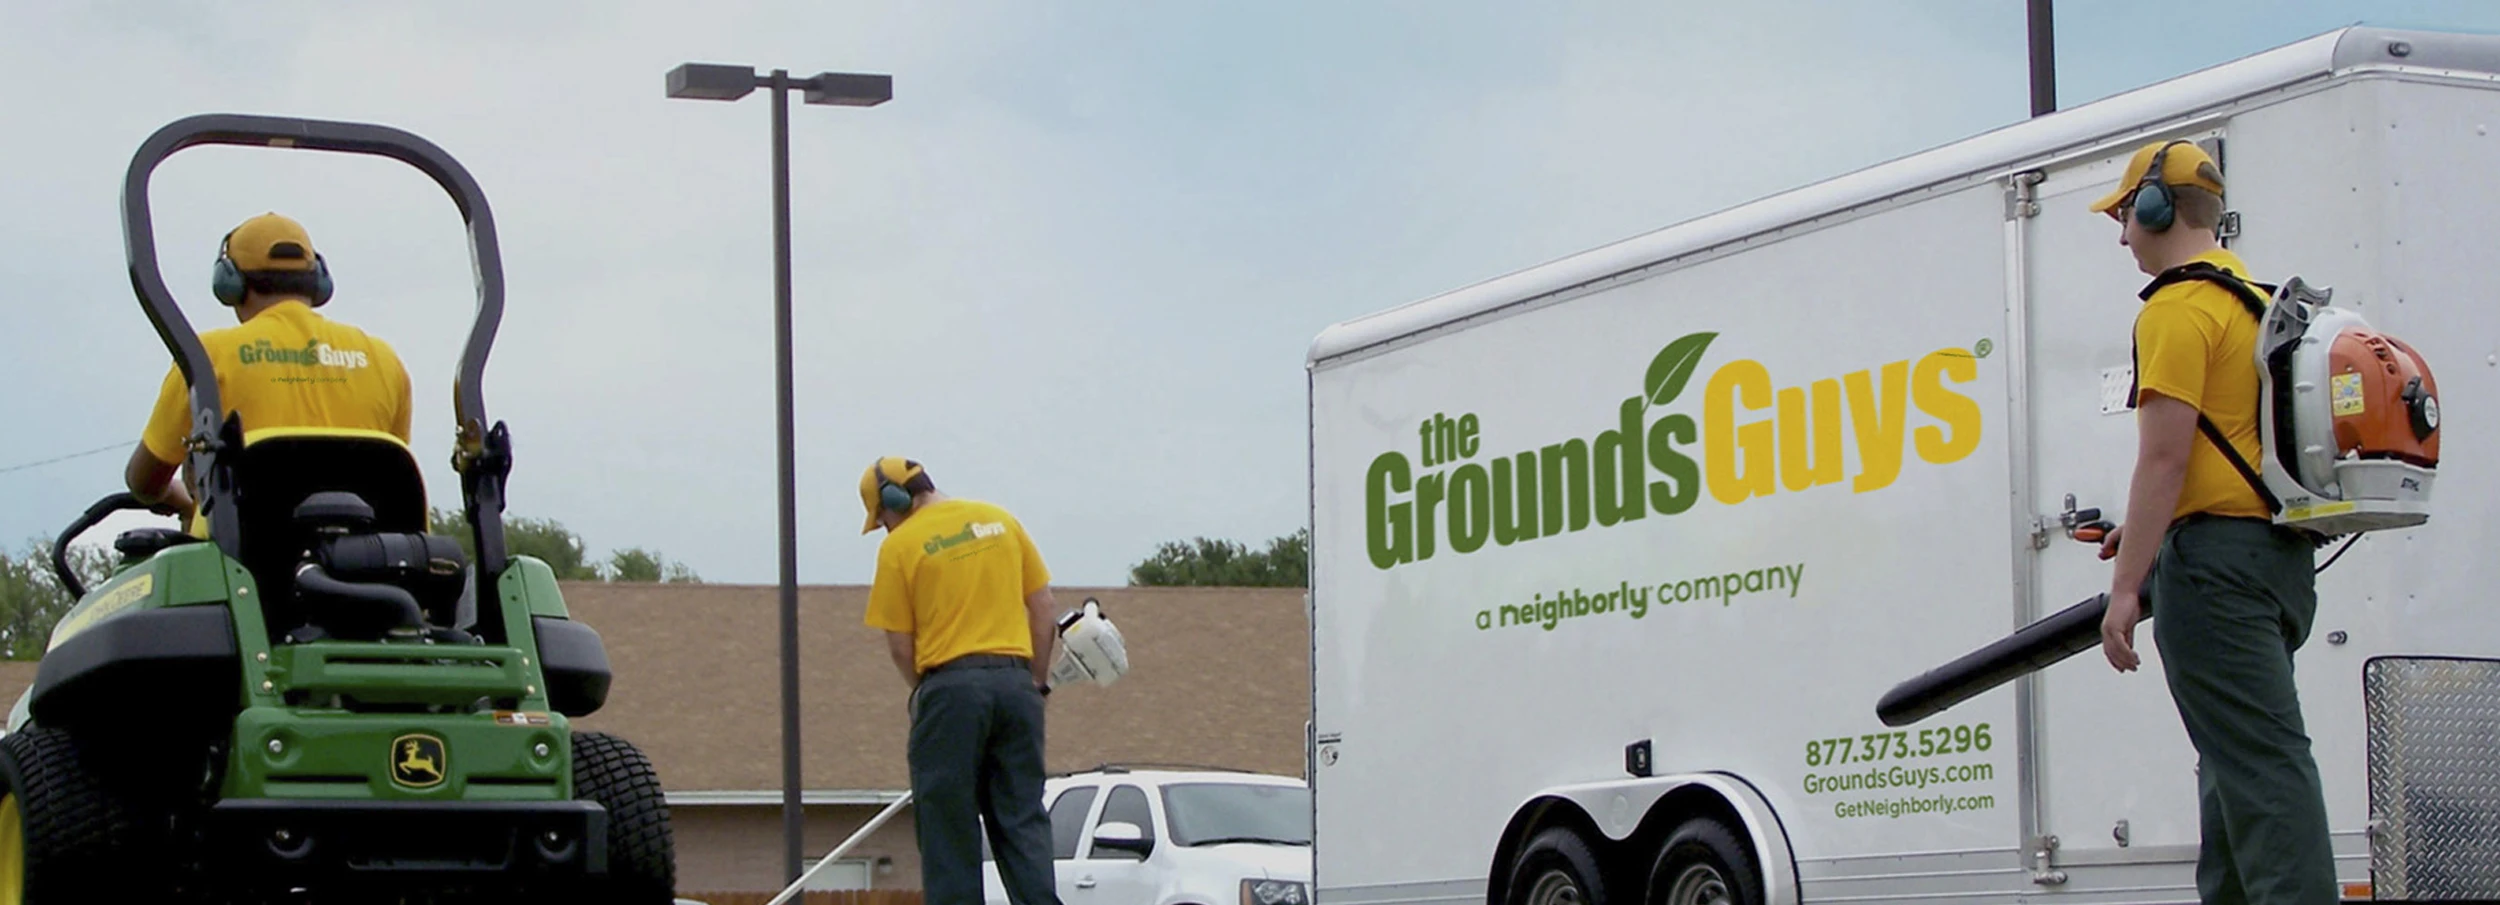 Grounds guys crew and trailer header image